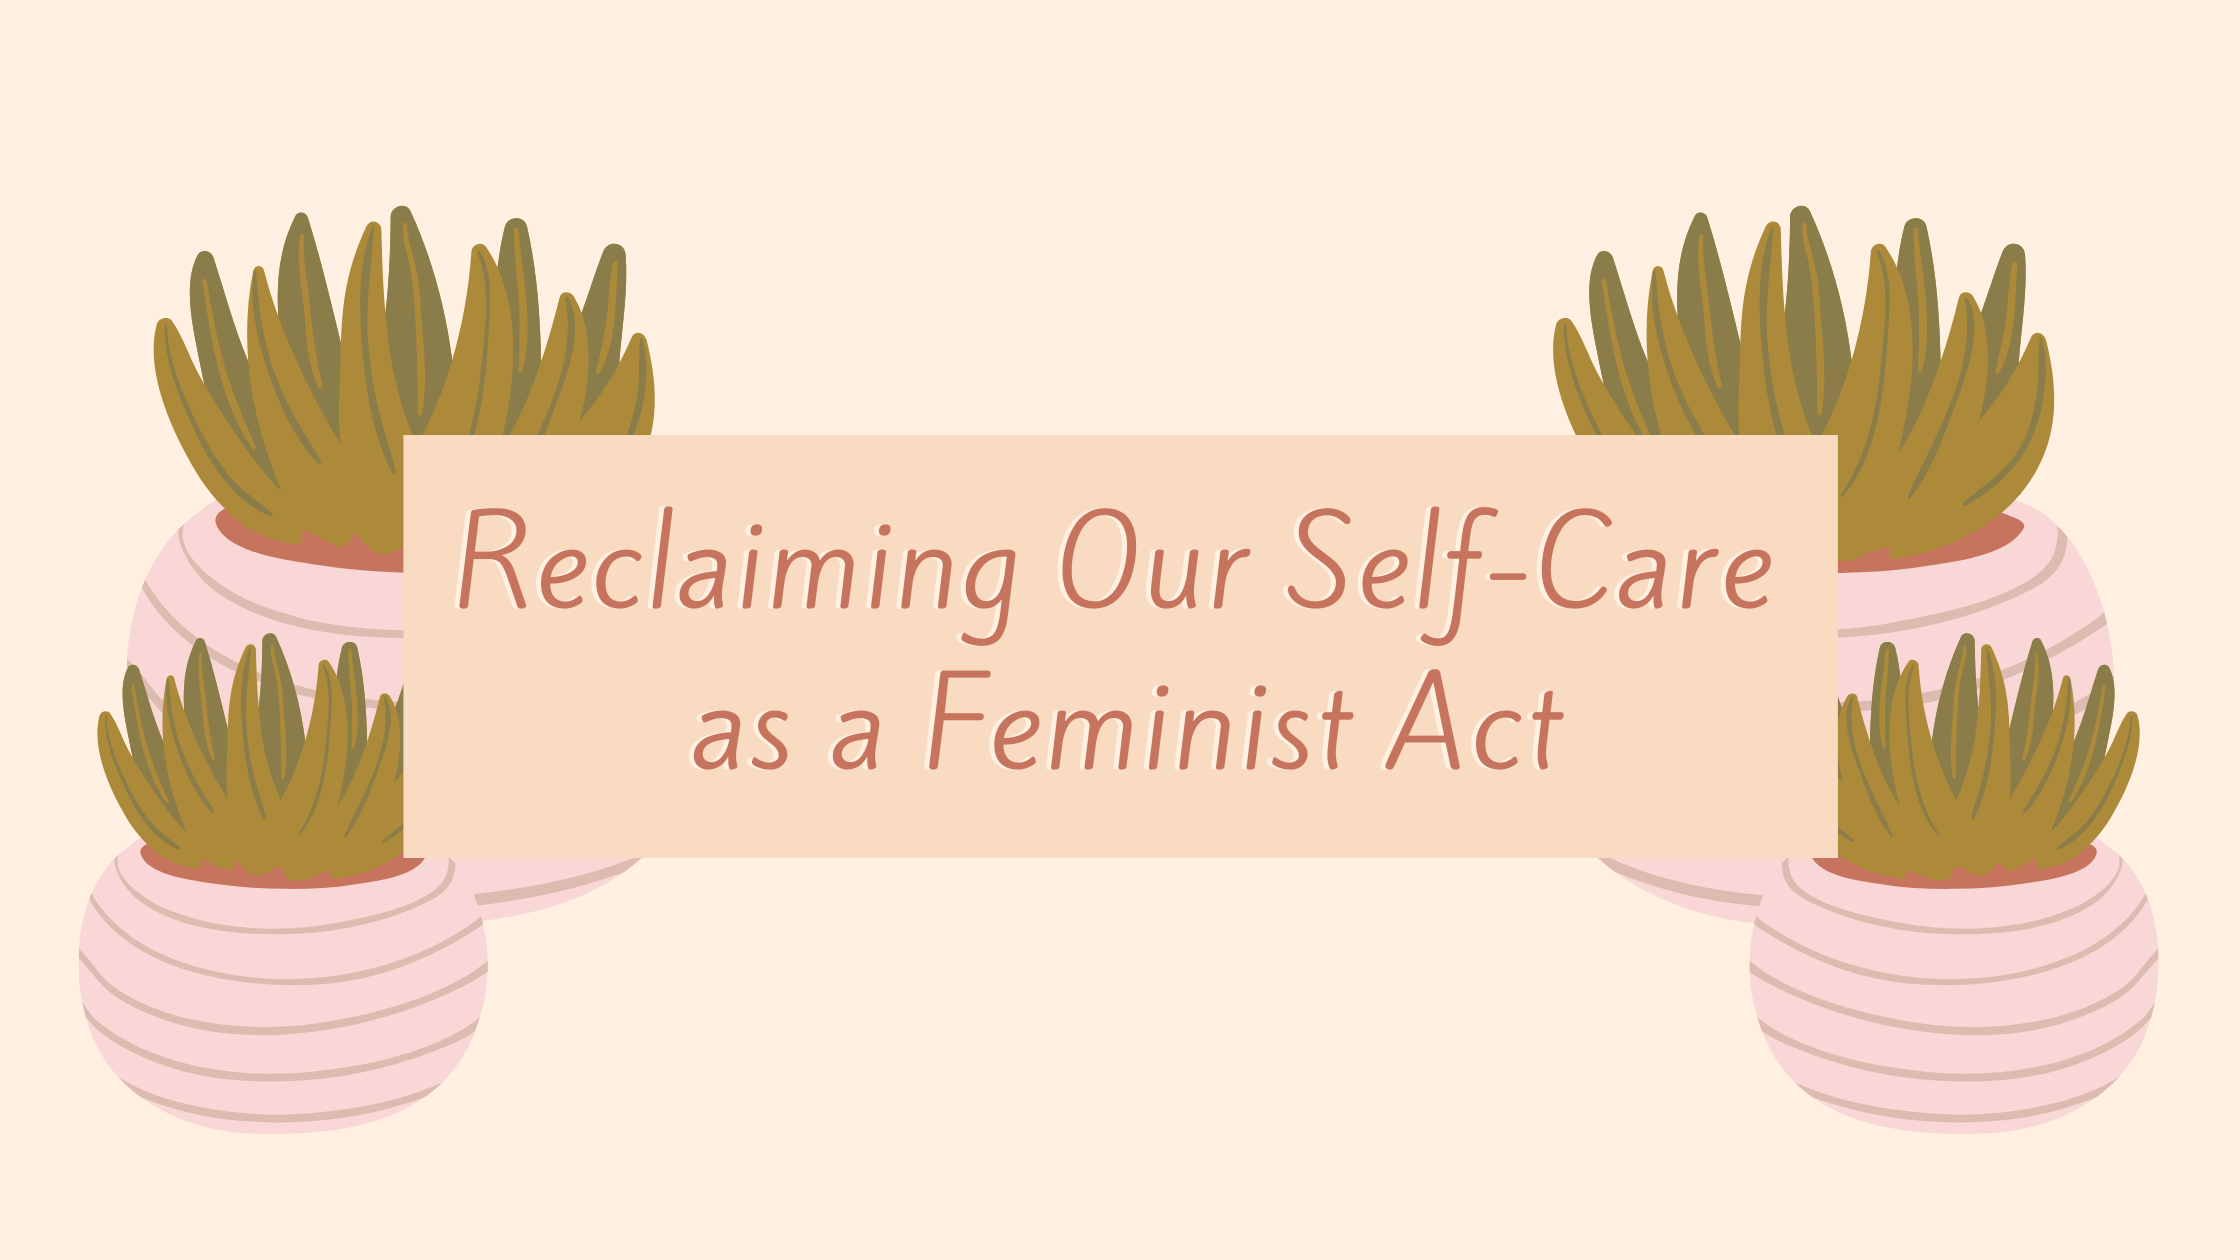 Image of plants in the background with the title of the blog post, "Reclaiming our self-care as a feminist act"